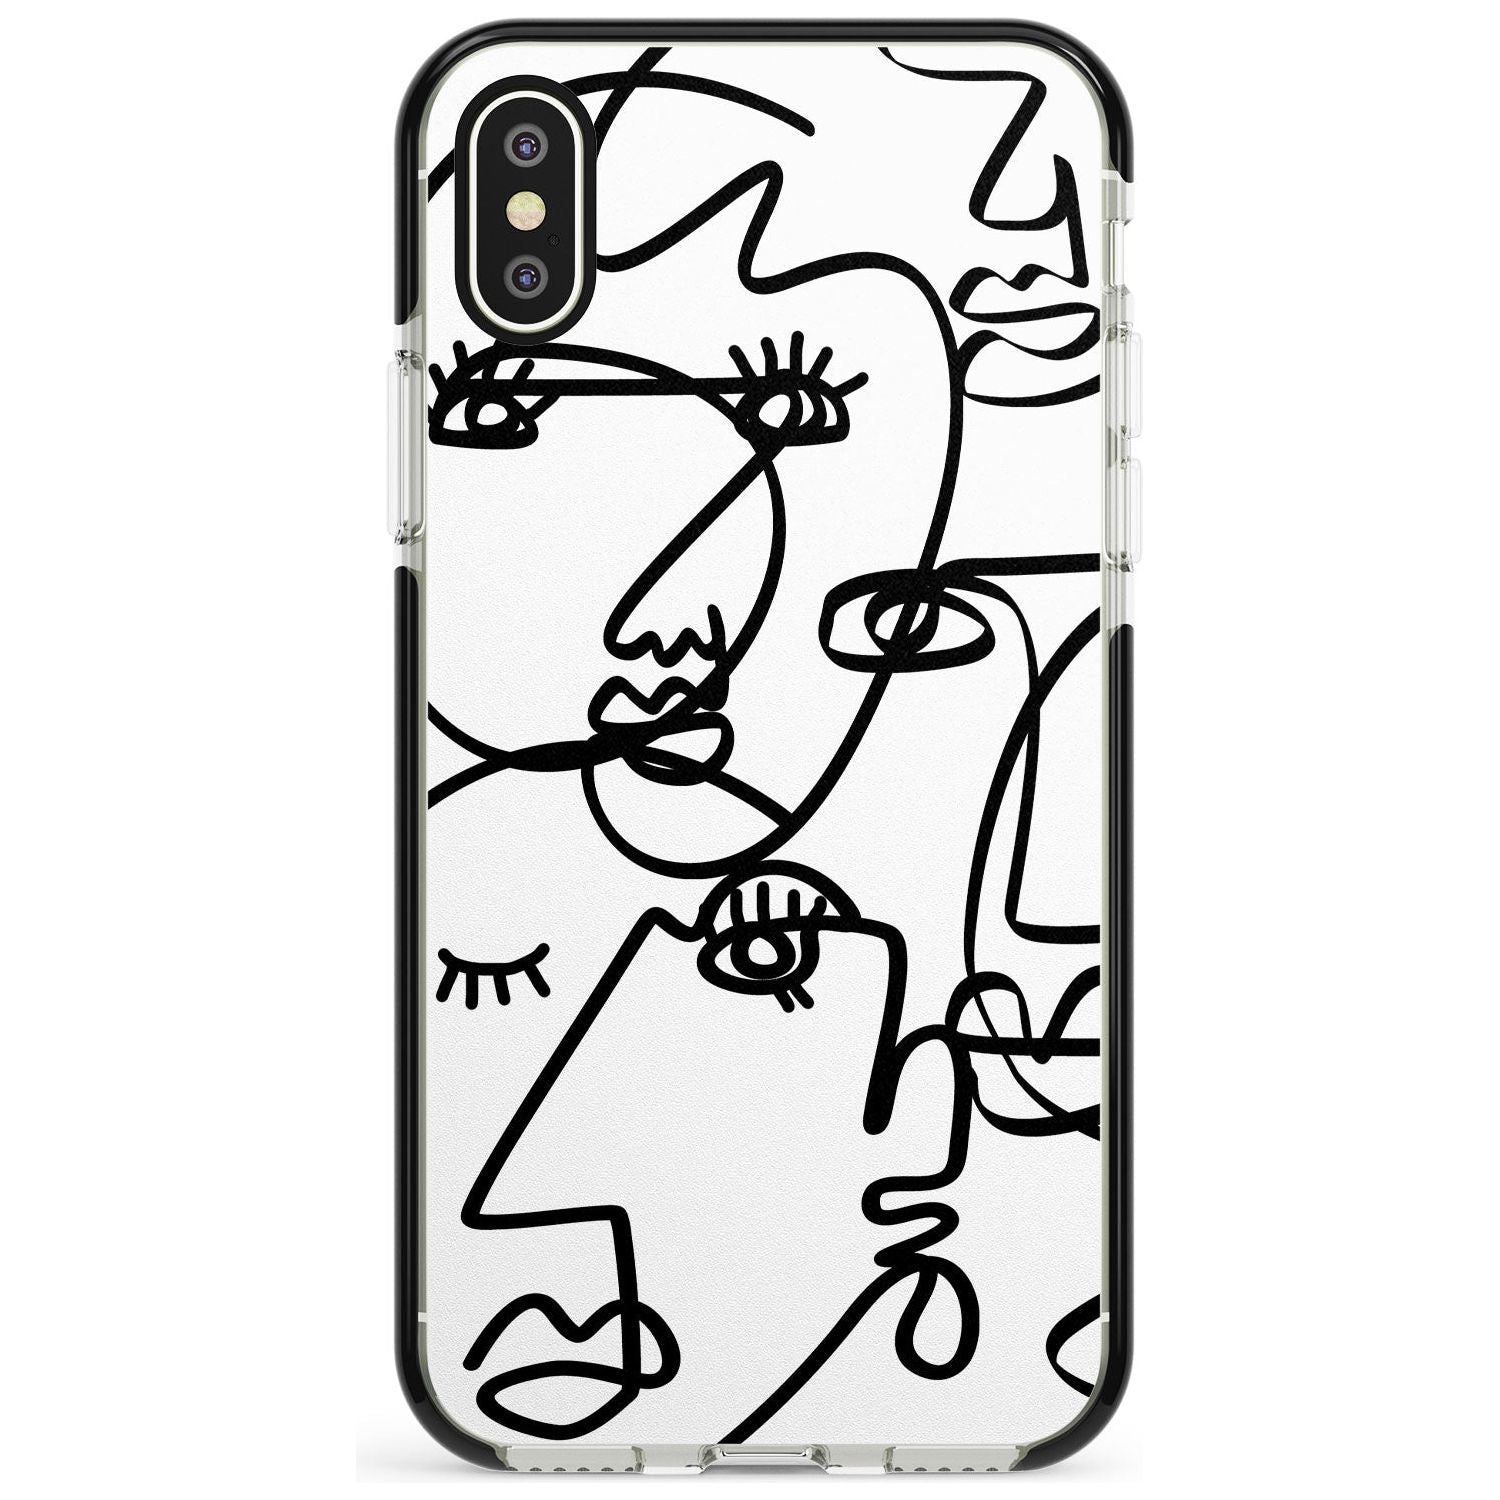 Continuous Line Faces: Black on White Pink Fade Impact Phone Case for iPhone X XS Max XR